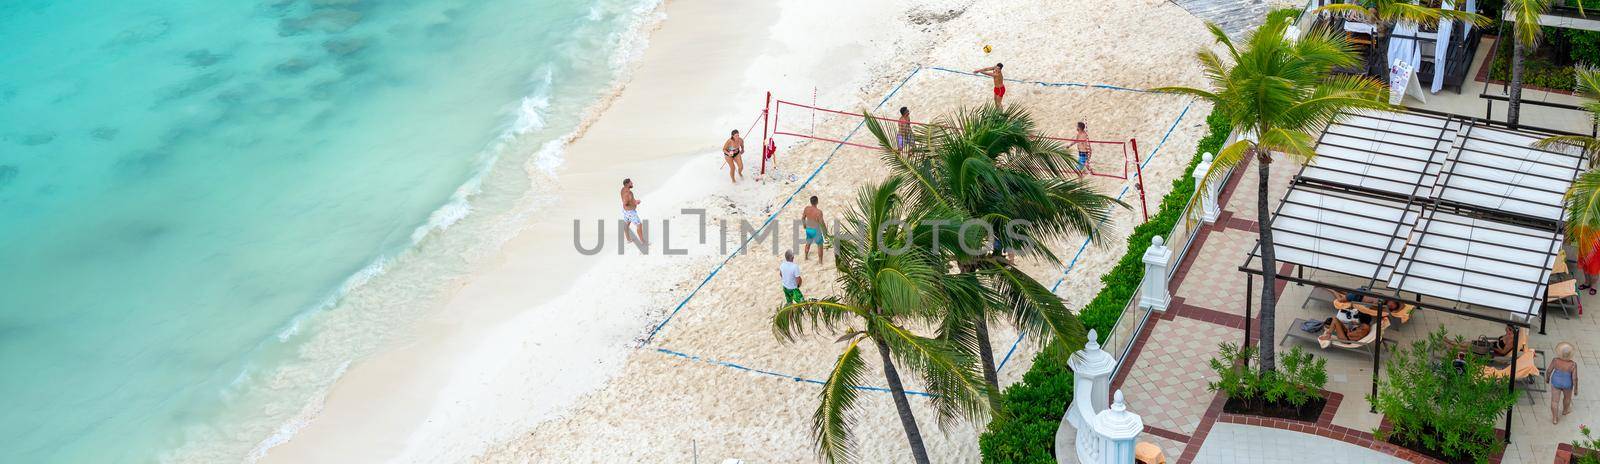 Tourists playing volleyball on a beach in all inclusive hotel in Cancun, Mexico.